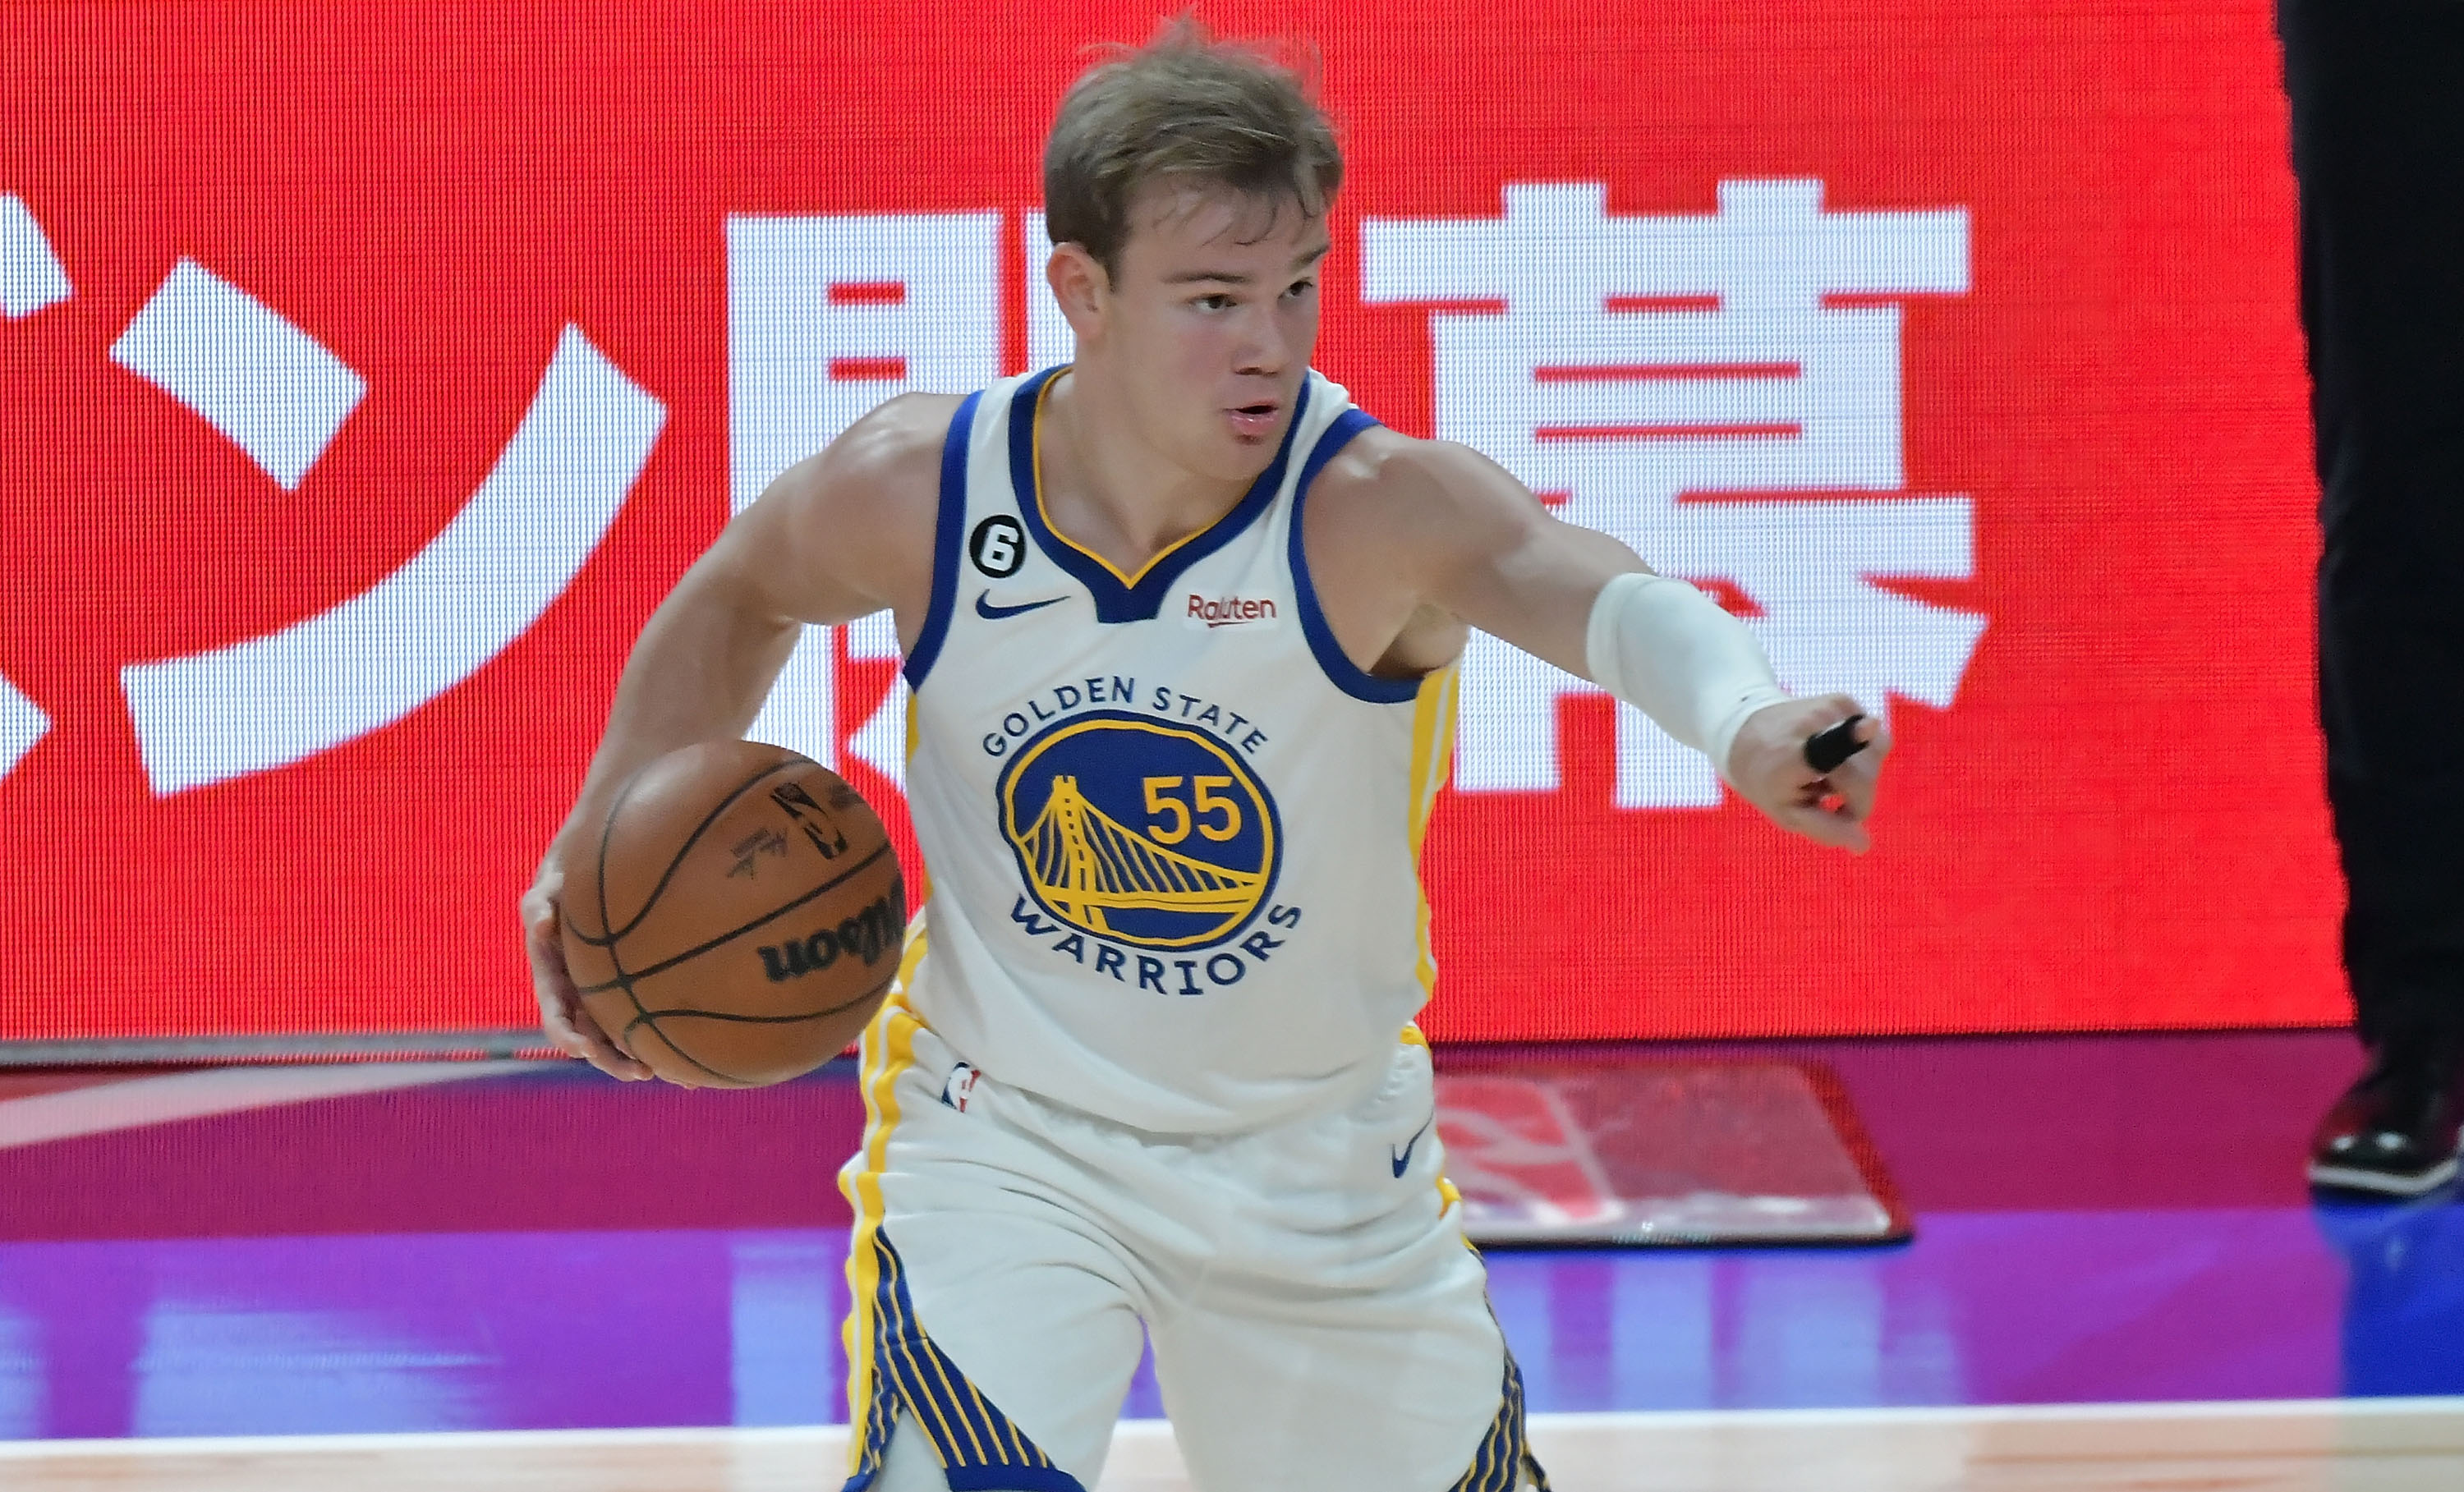 Mac McClung dribbling with his right hand and pointing with his left